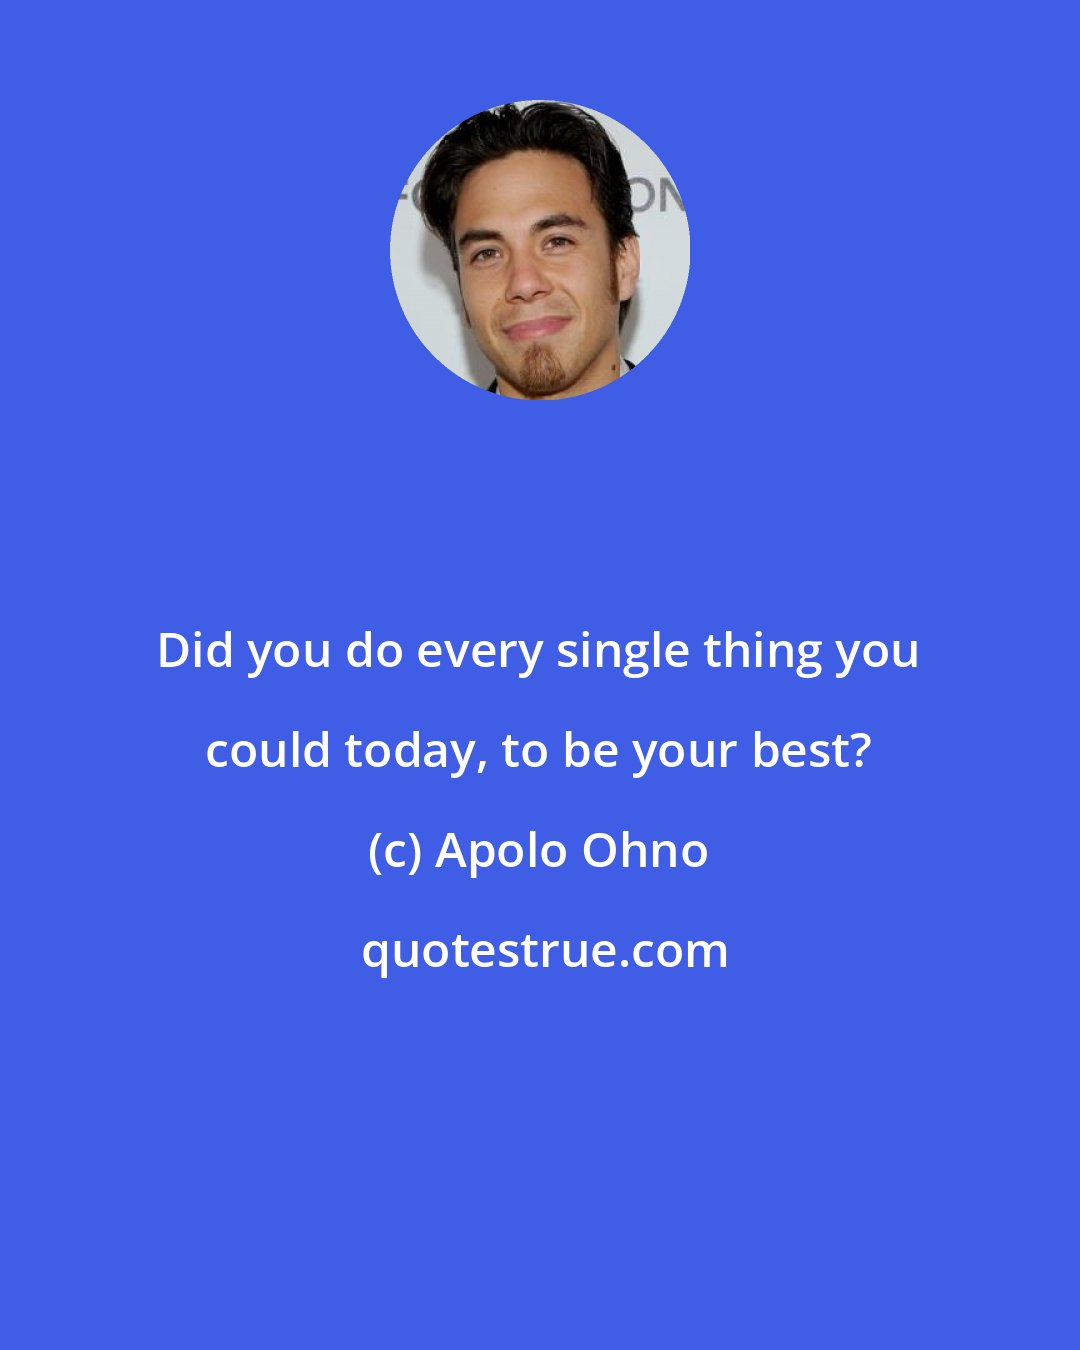 Apolo Ohno: Did you do every single thing you could today, to be your best?